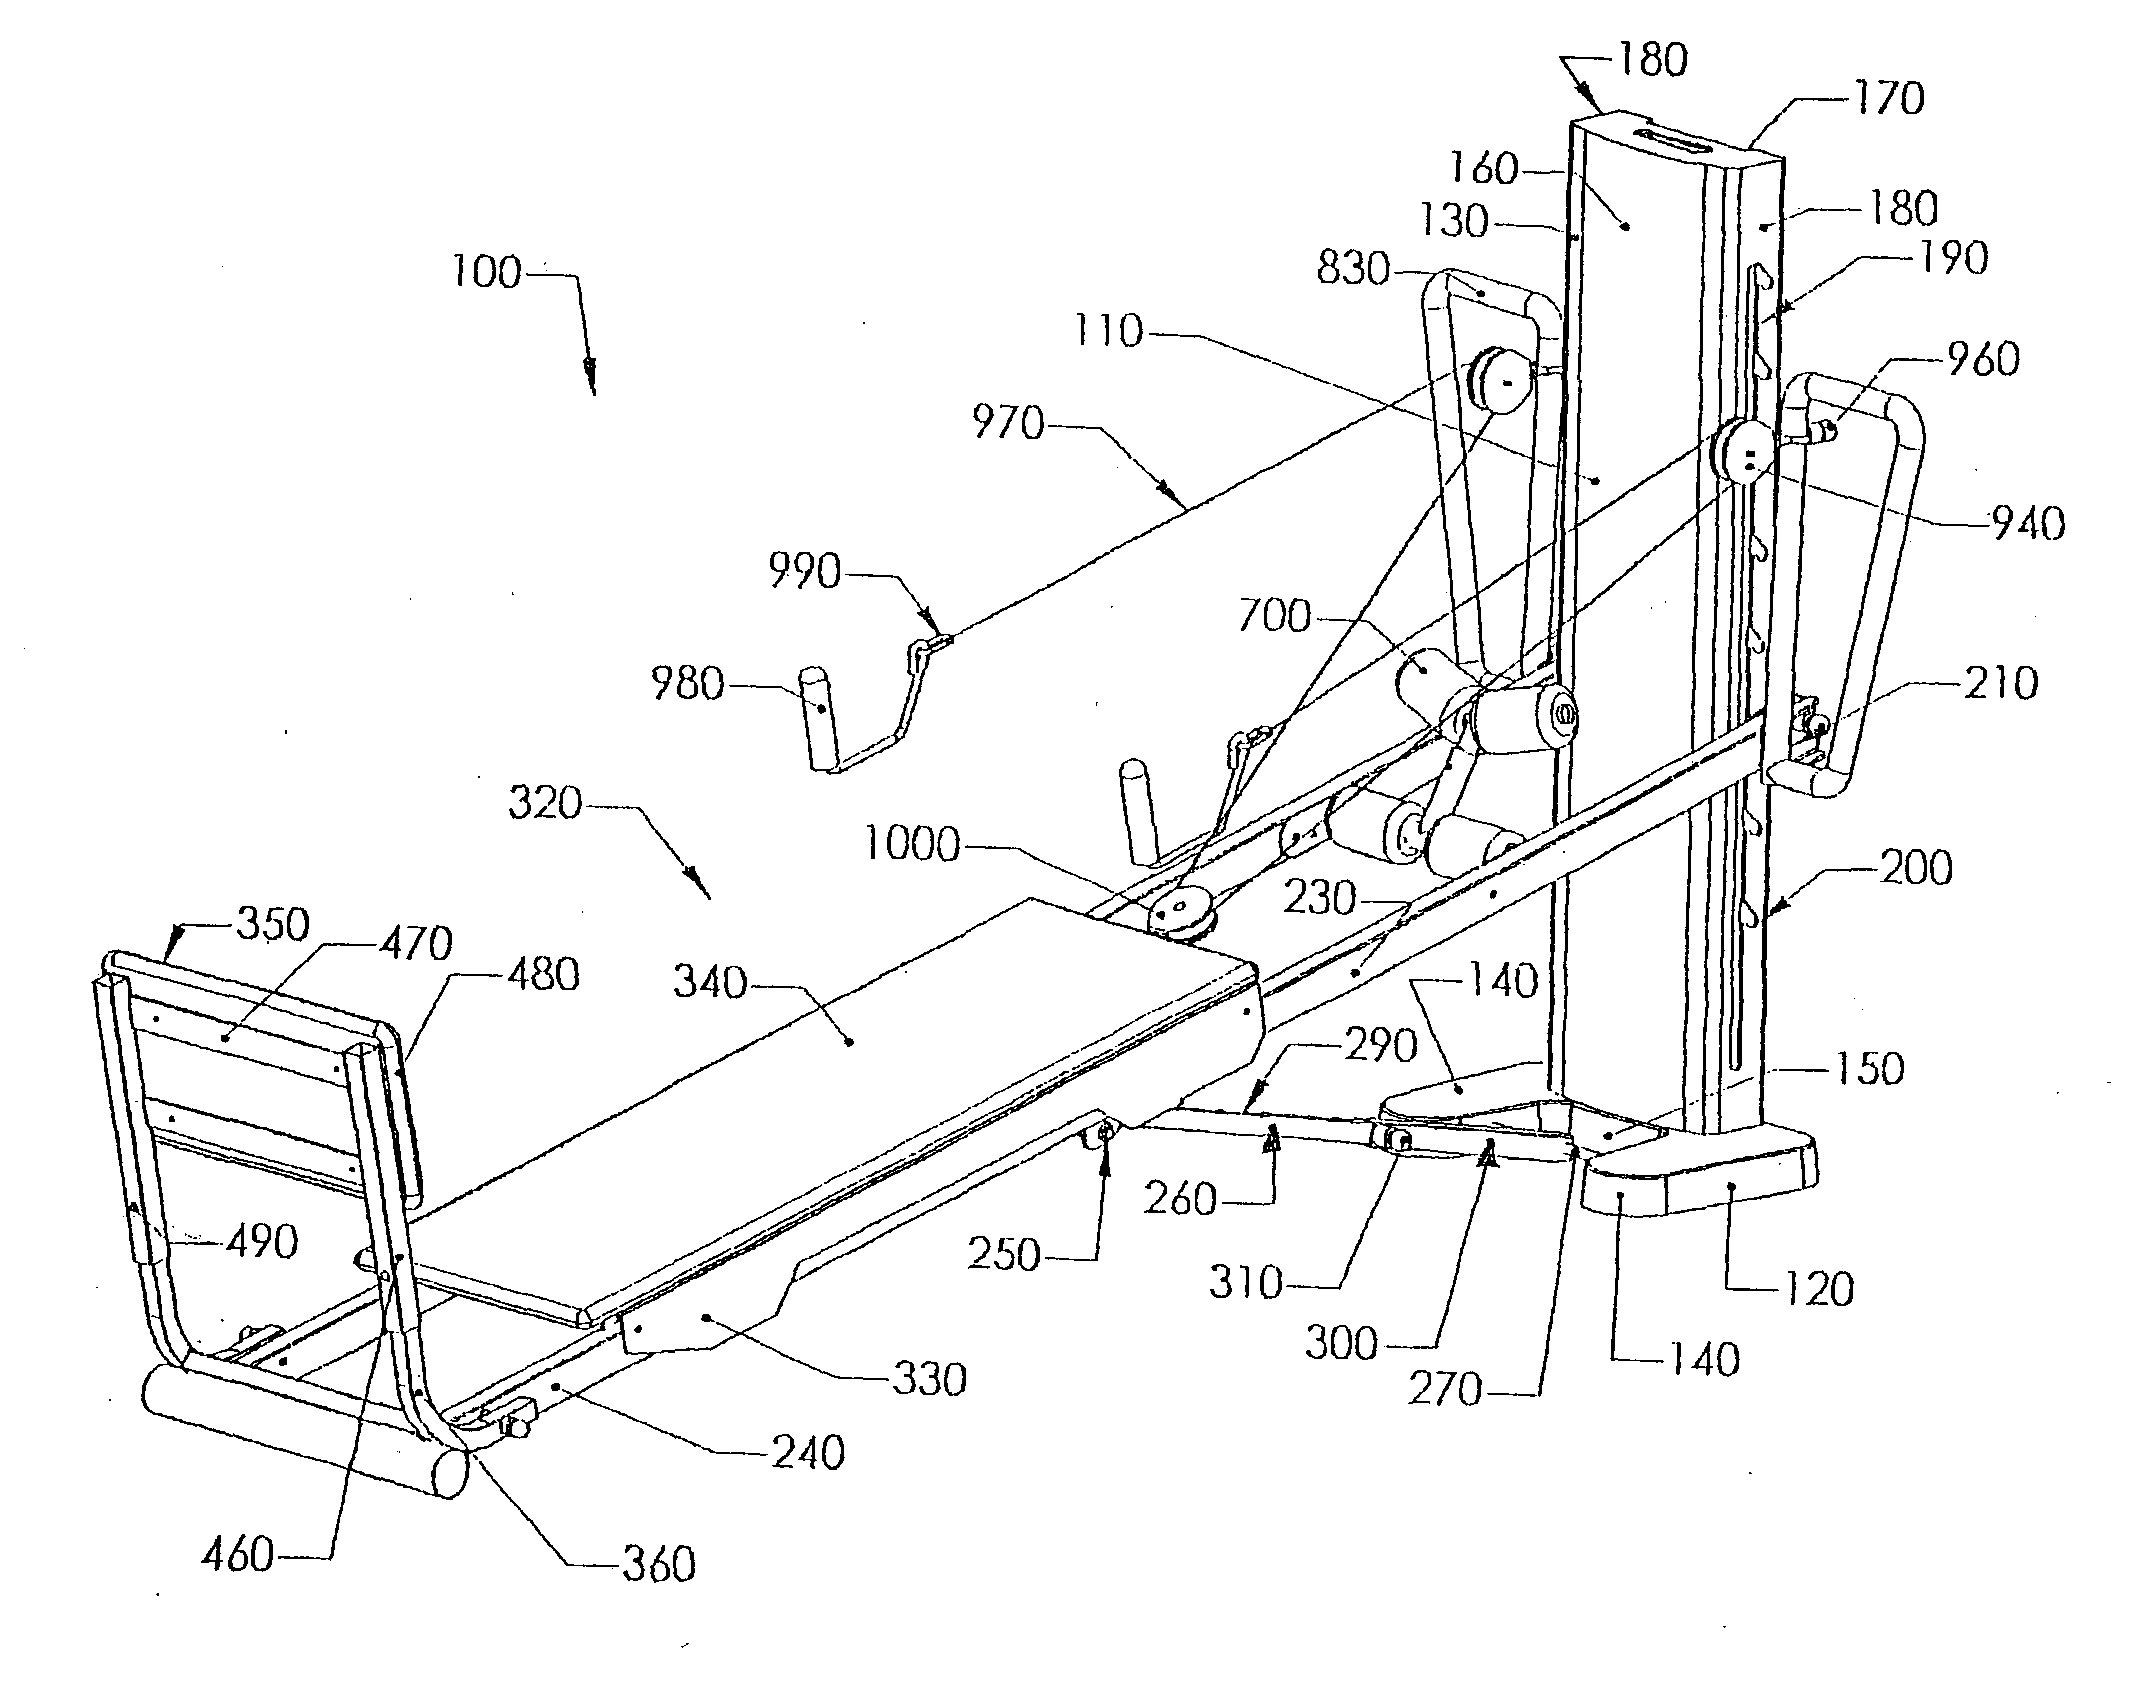 Method of Using an Exercise Device Having an Adjustable Incline